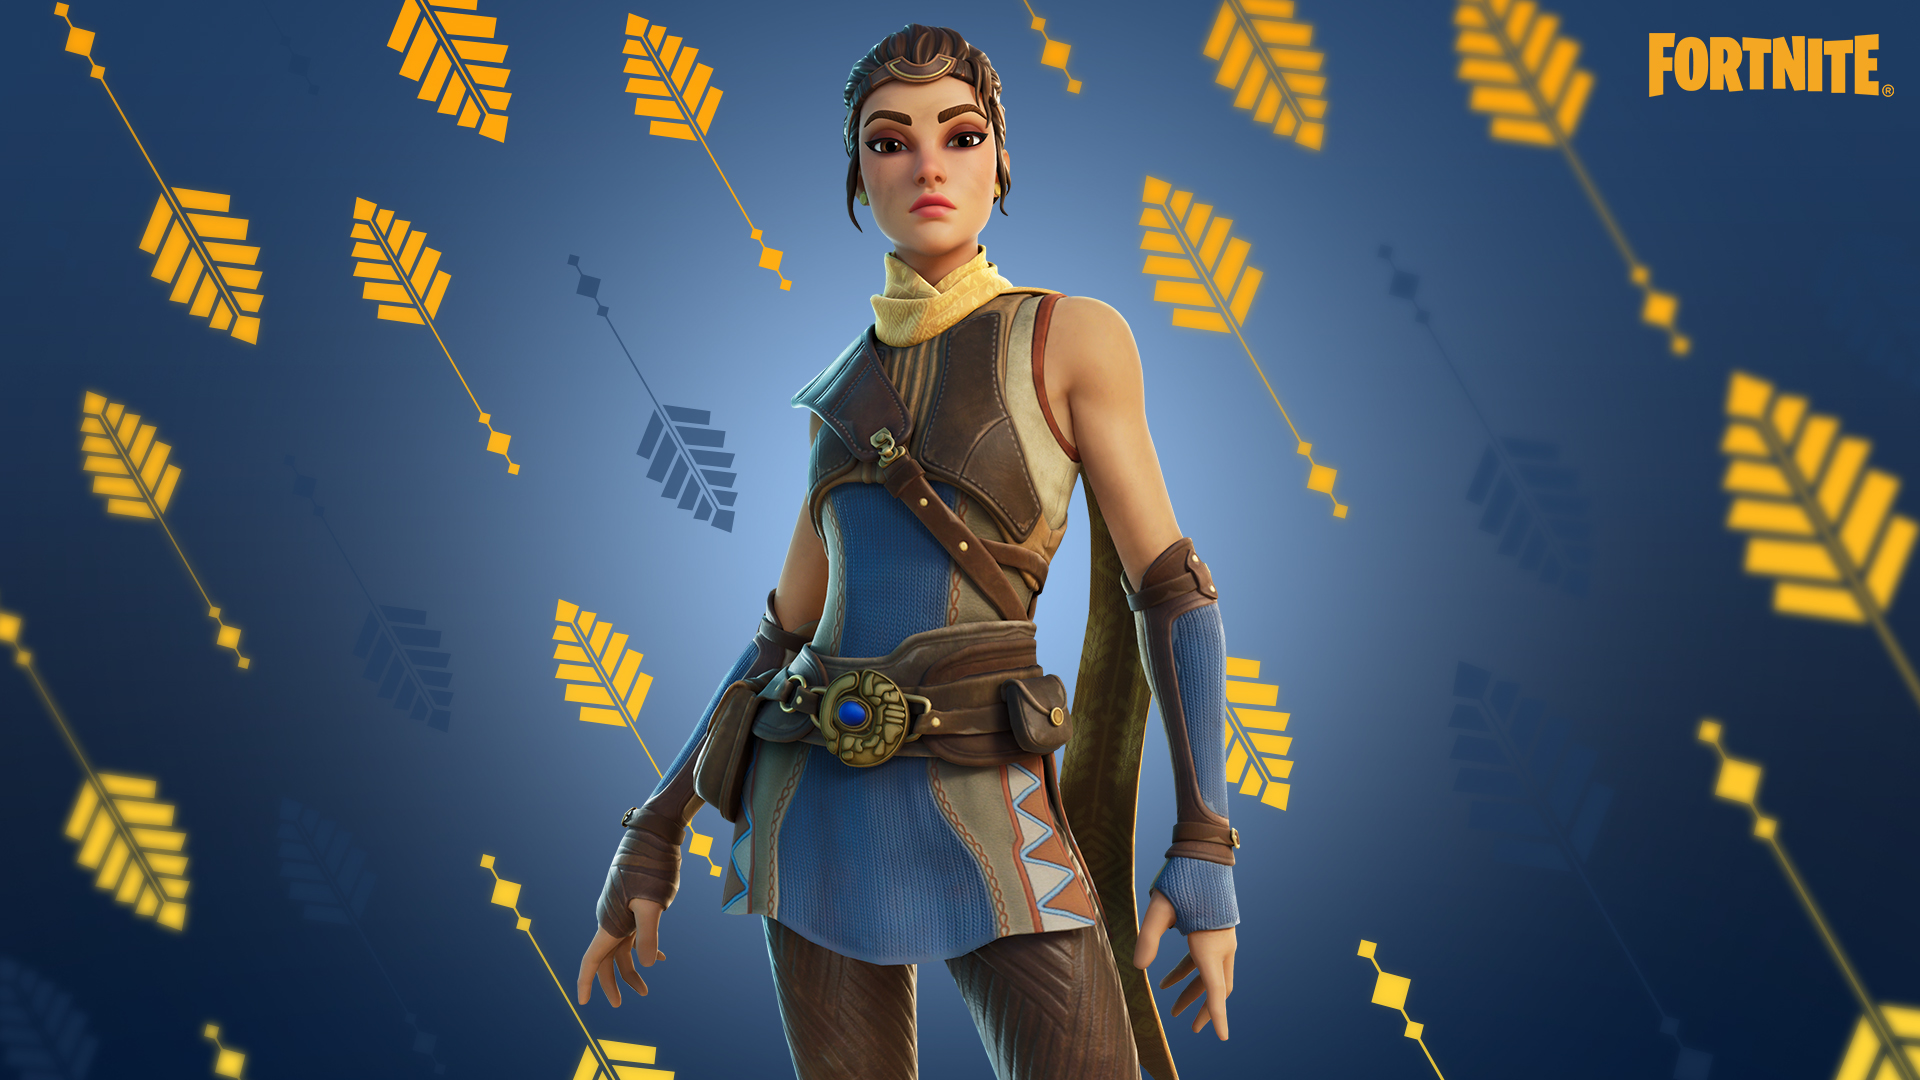 The Windwalker Echo Fortnite Skin based on the characters from the Unreal Engine 5 demo, she wears leather armor over a blue dress